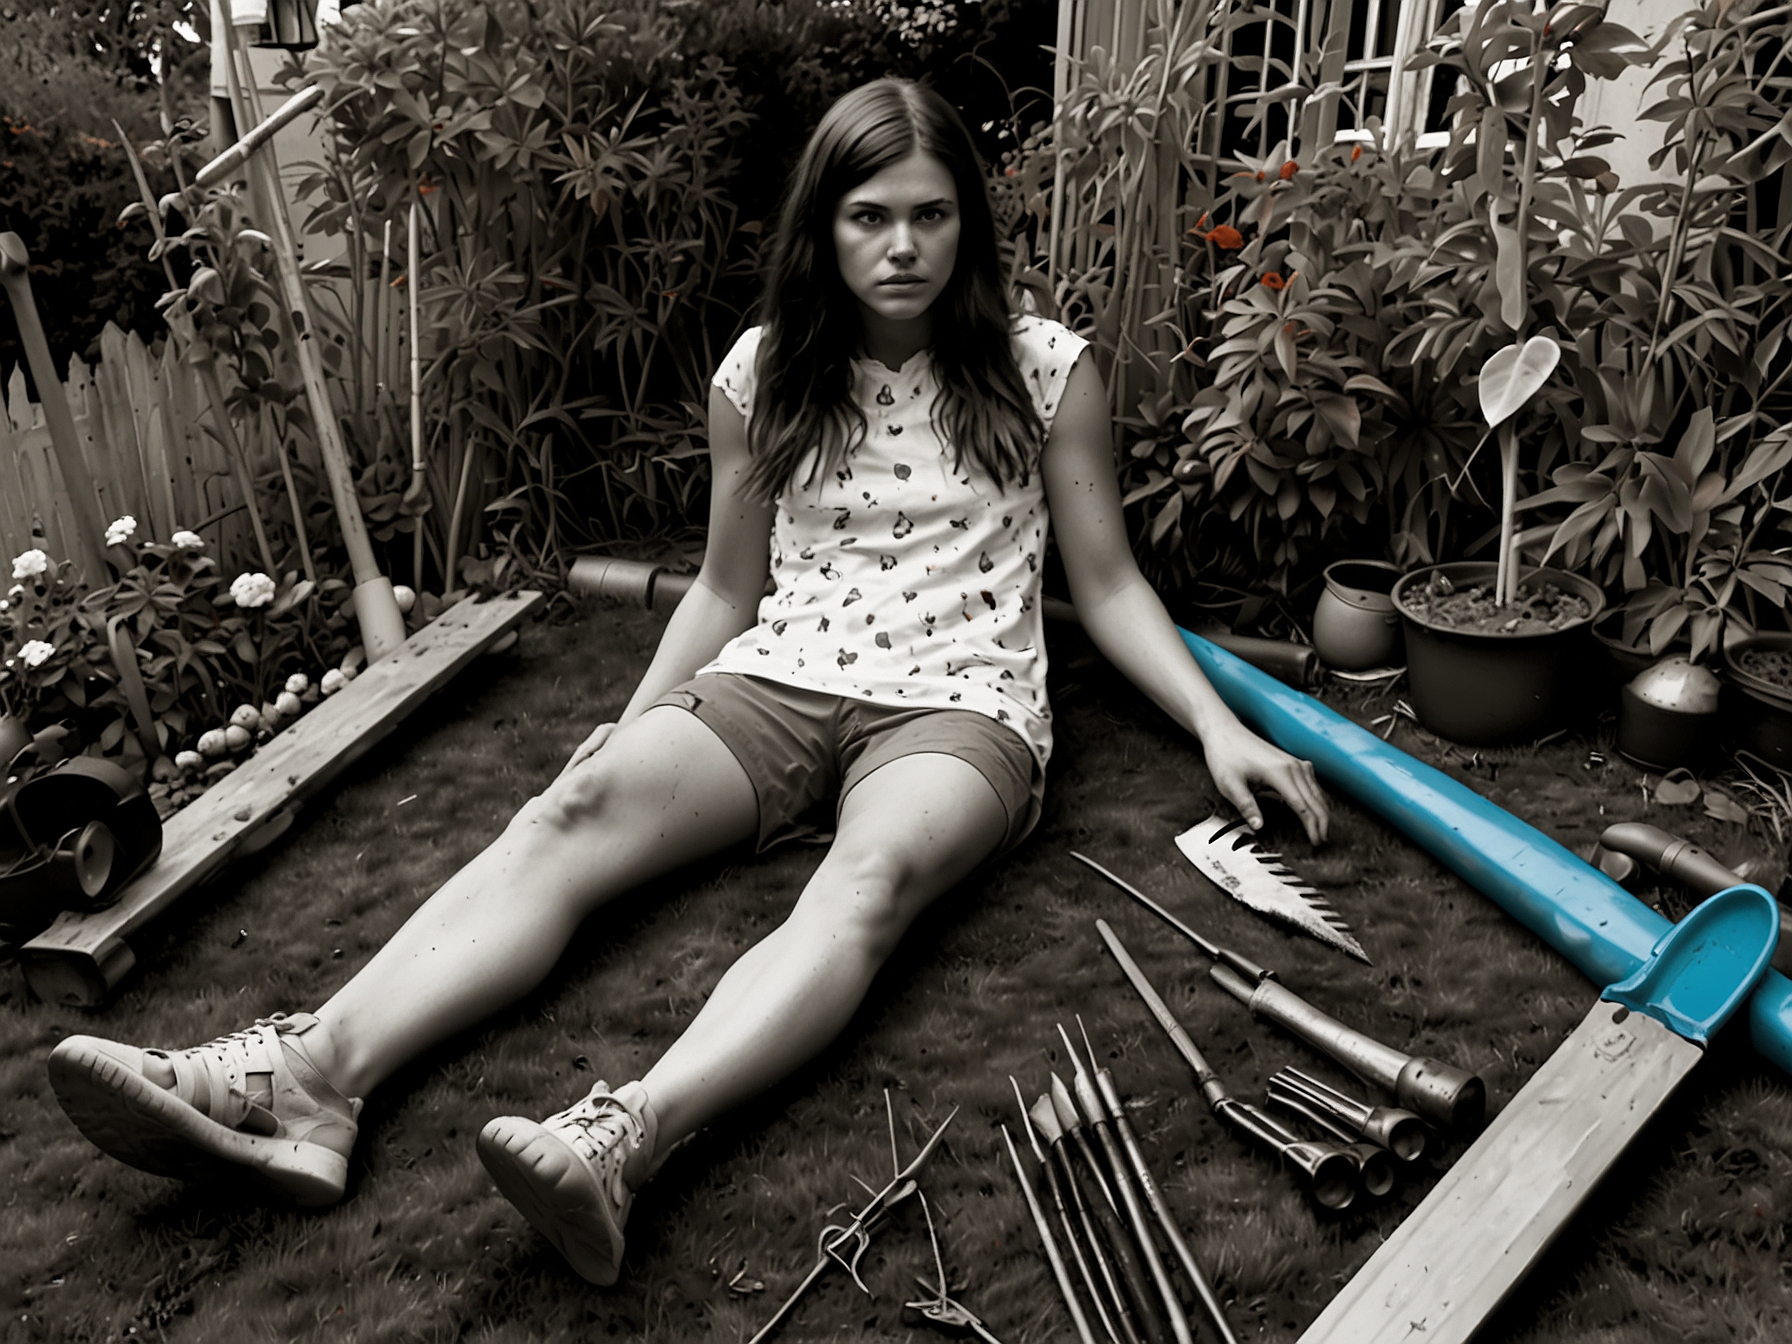 Katie Archibald lies injured in her garden, clutching her leg while surrounded by scattered gardening tools, symbolizing the severity of the freak accident that dashed her Olympic dreams.